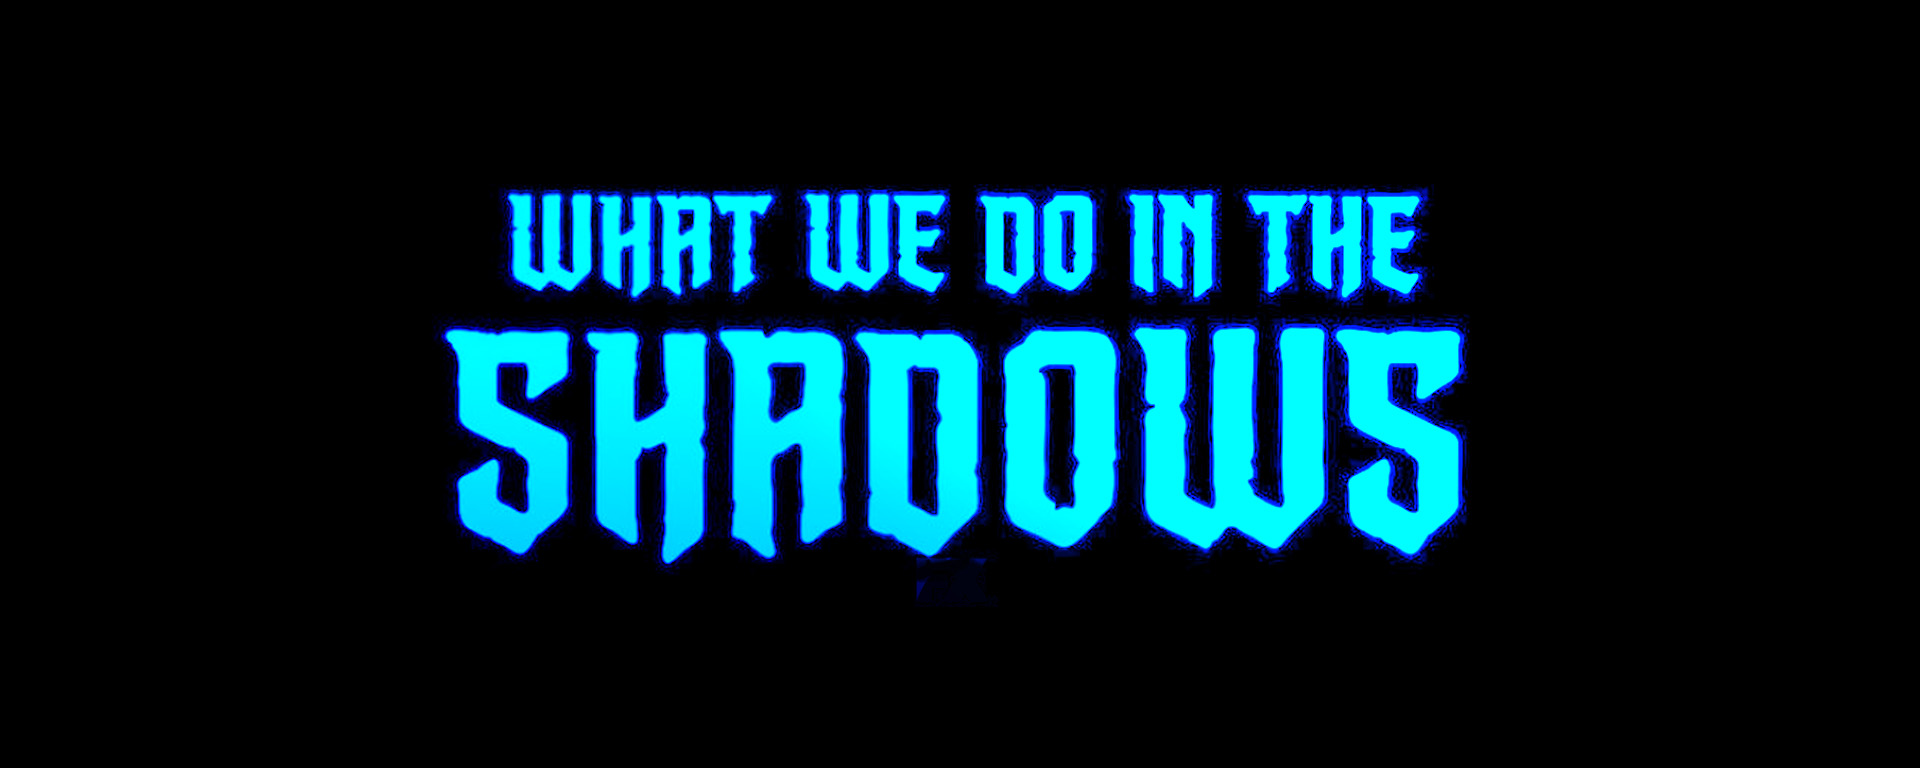 What We Do in the Shadows Header